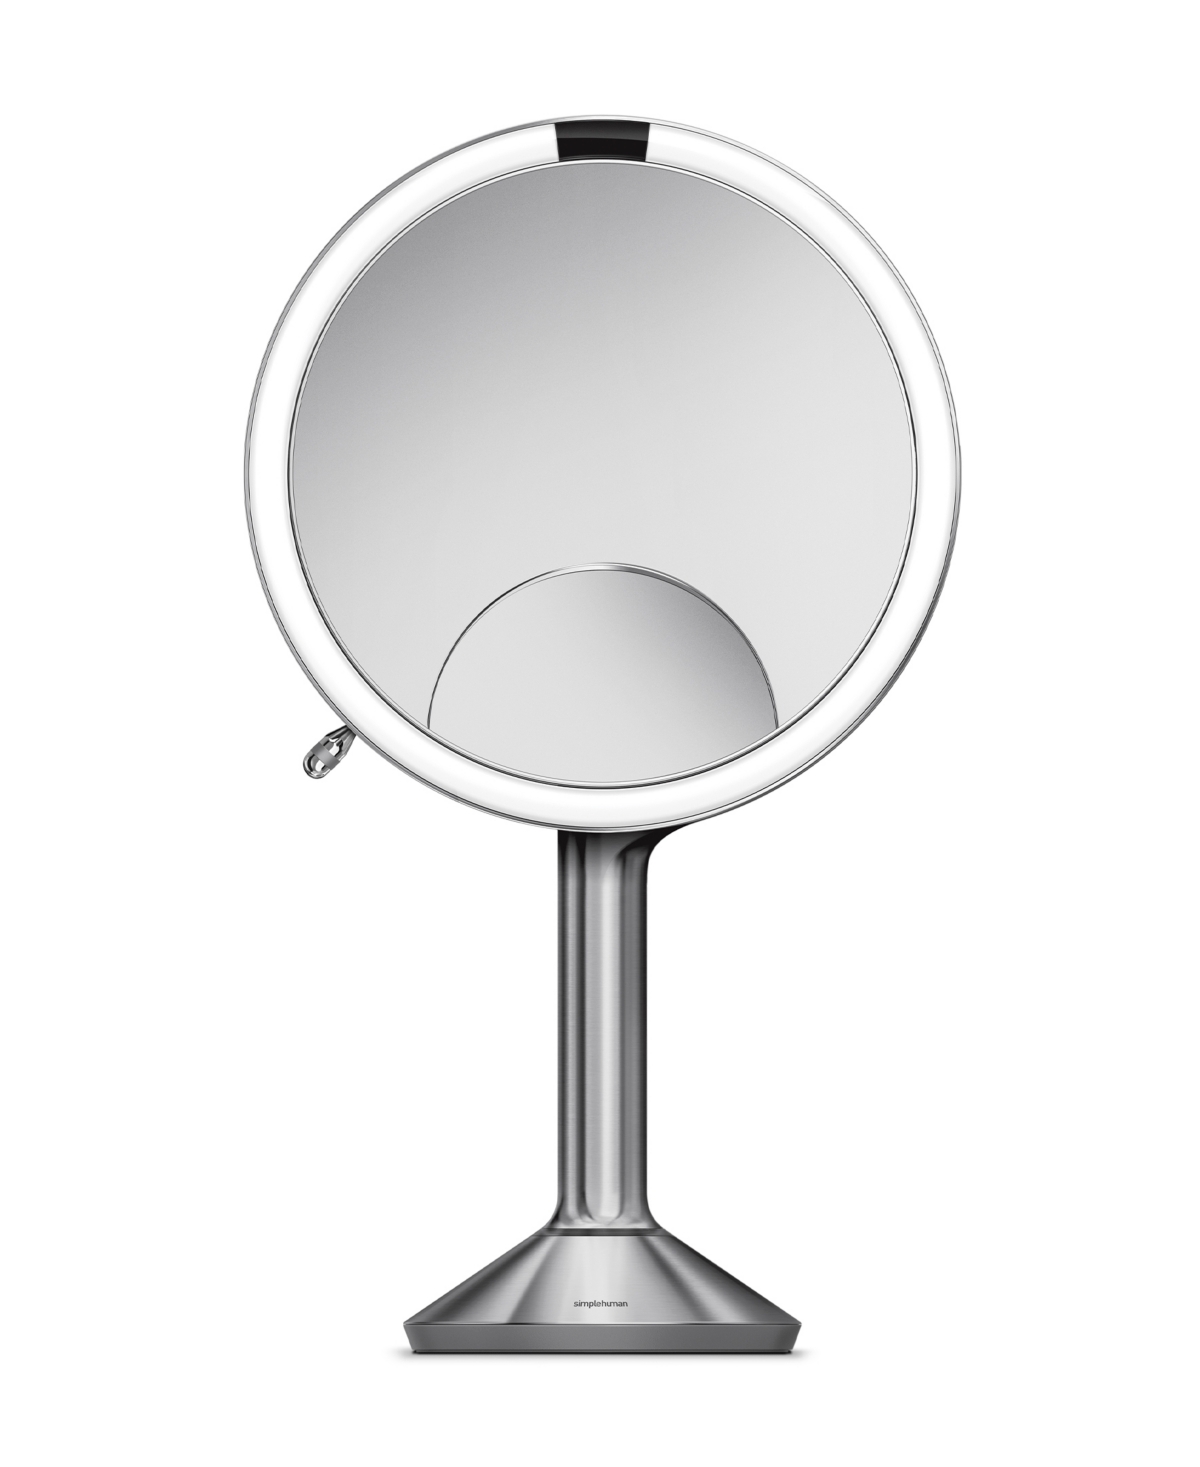 8" Trio Lighted Sensor Makeup Mirror - Brushed Stainless Steel